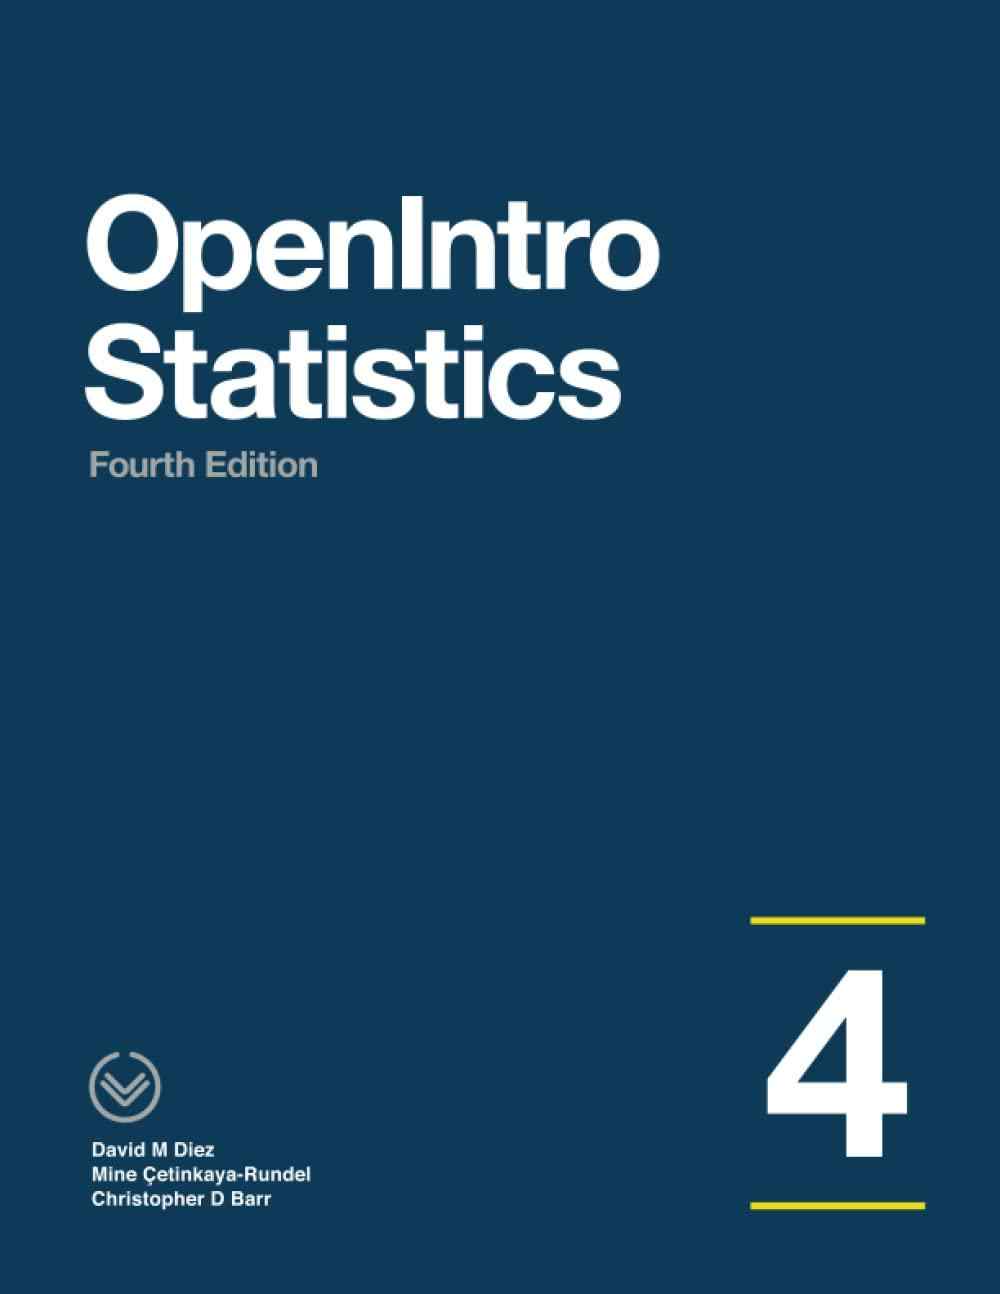 OpenIntro Statistics Textbook Questions And Answers